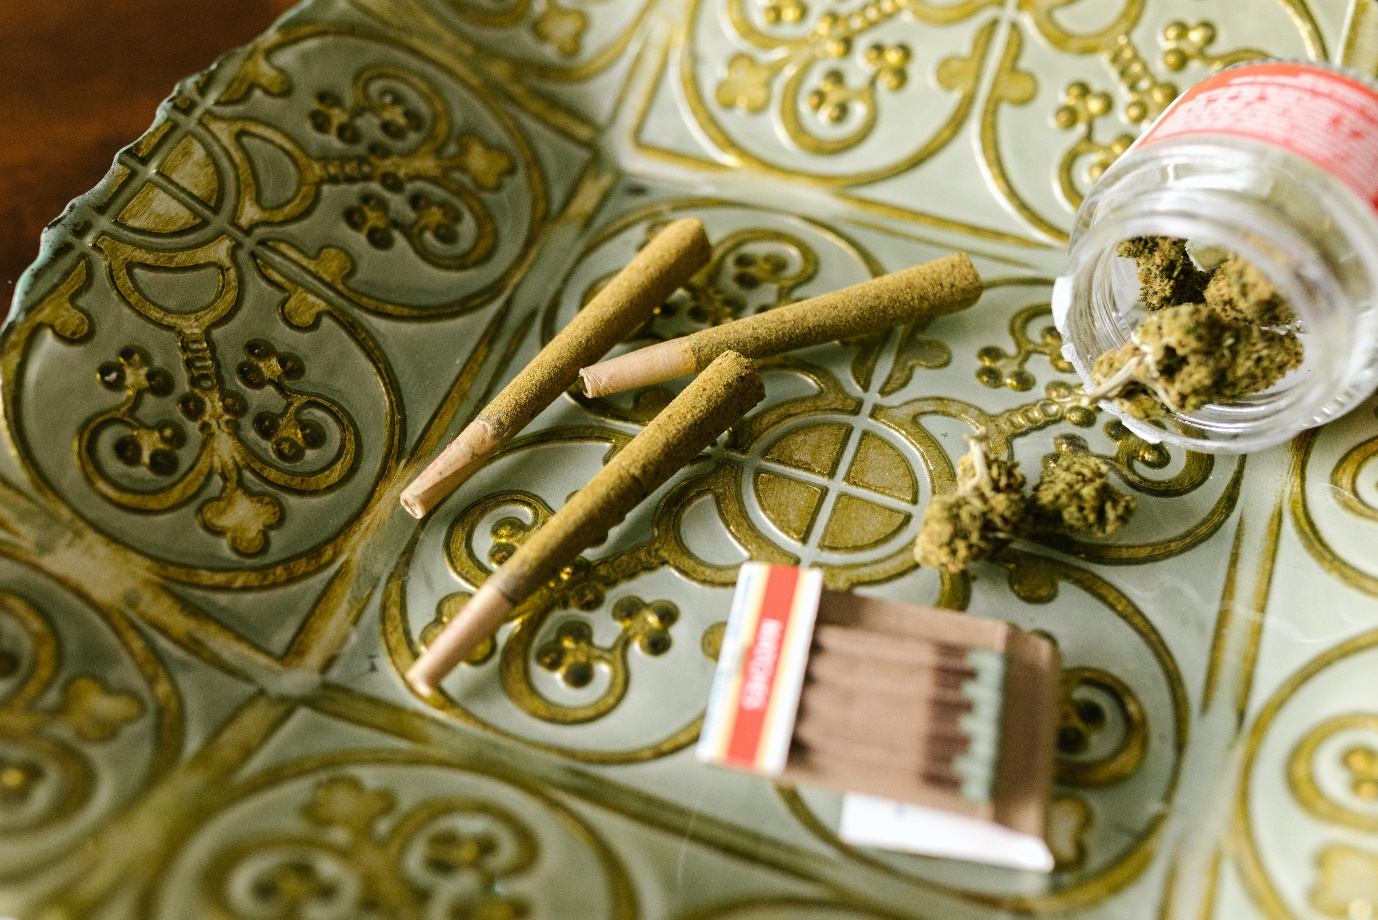 rolled up joints of marijuana